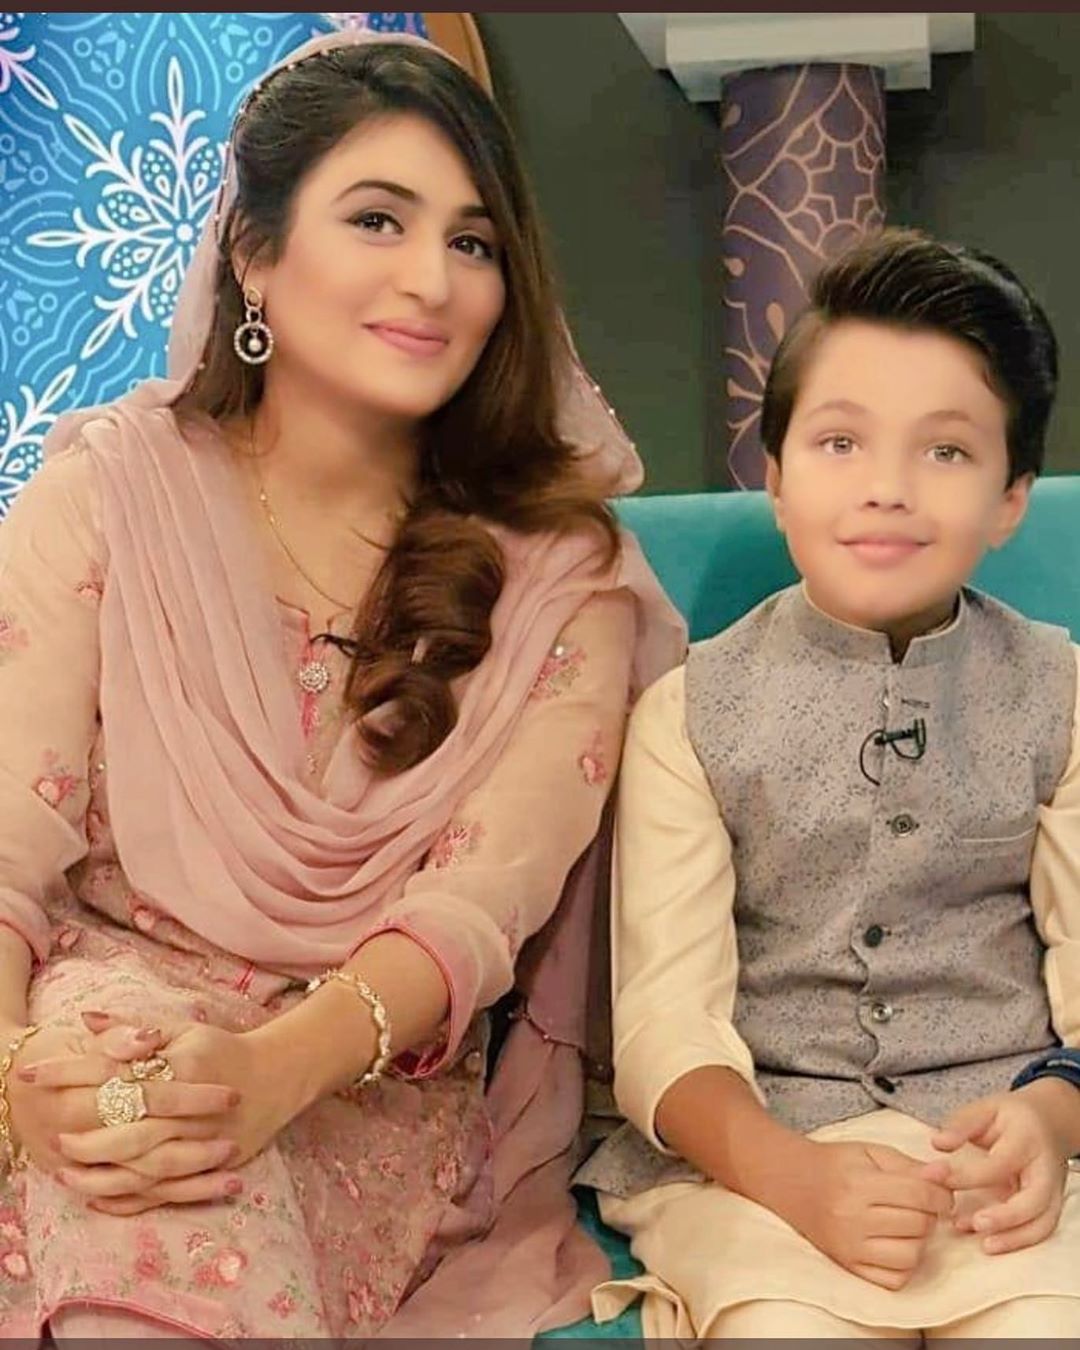 Qurat ul Ain Iqrar with Her Son Pehlaaj - Adorable Pictures